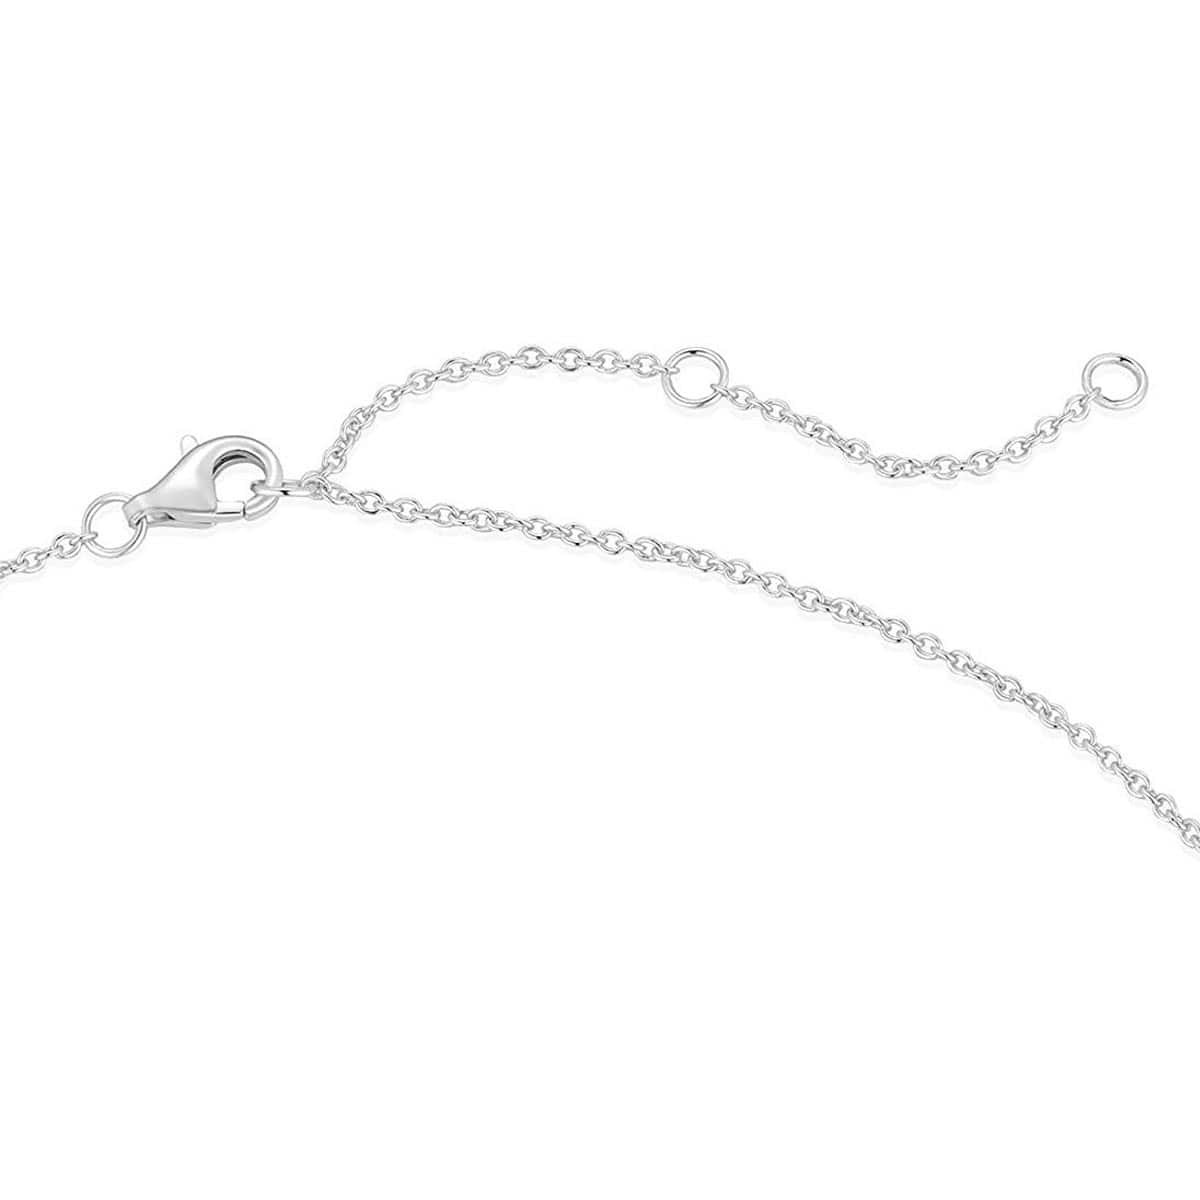 FANCIME Edgy Men's Cross Sterling Silver Necklace Link